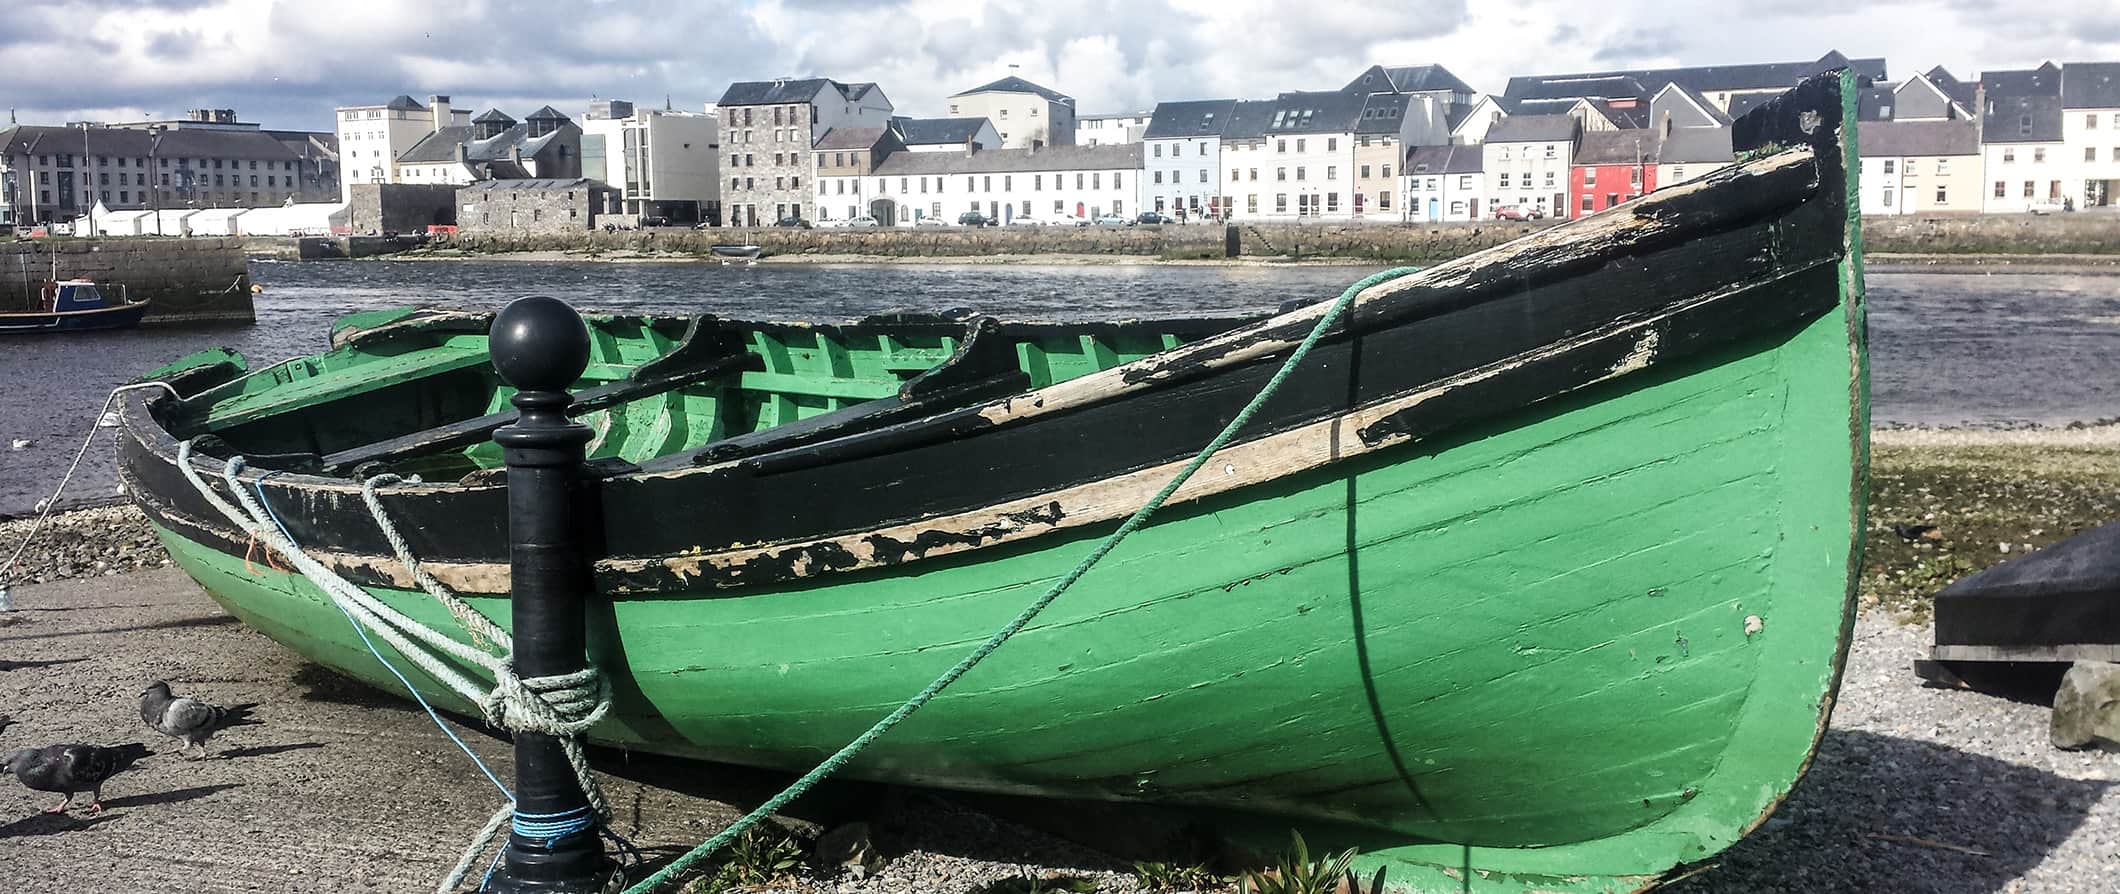 view of Galway's waterfront with a small, green boat beached in the sand along the coast